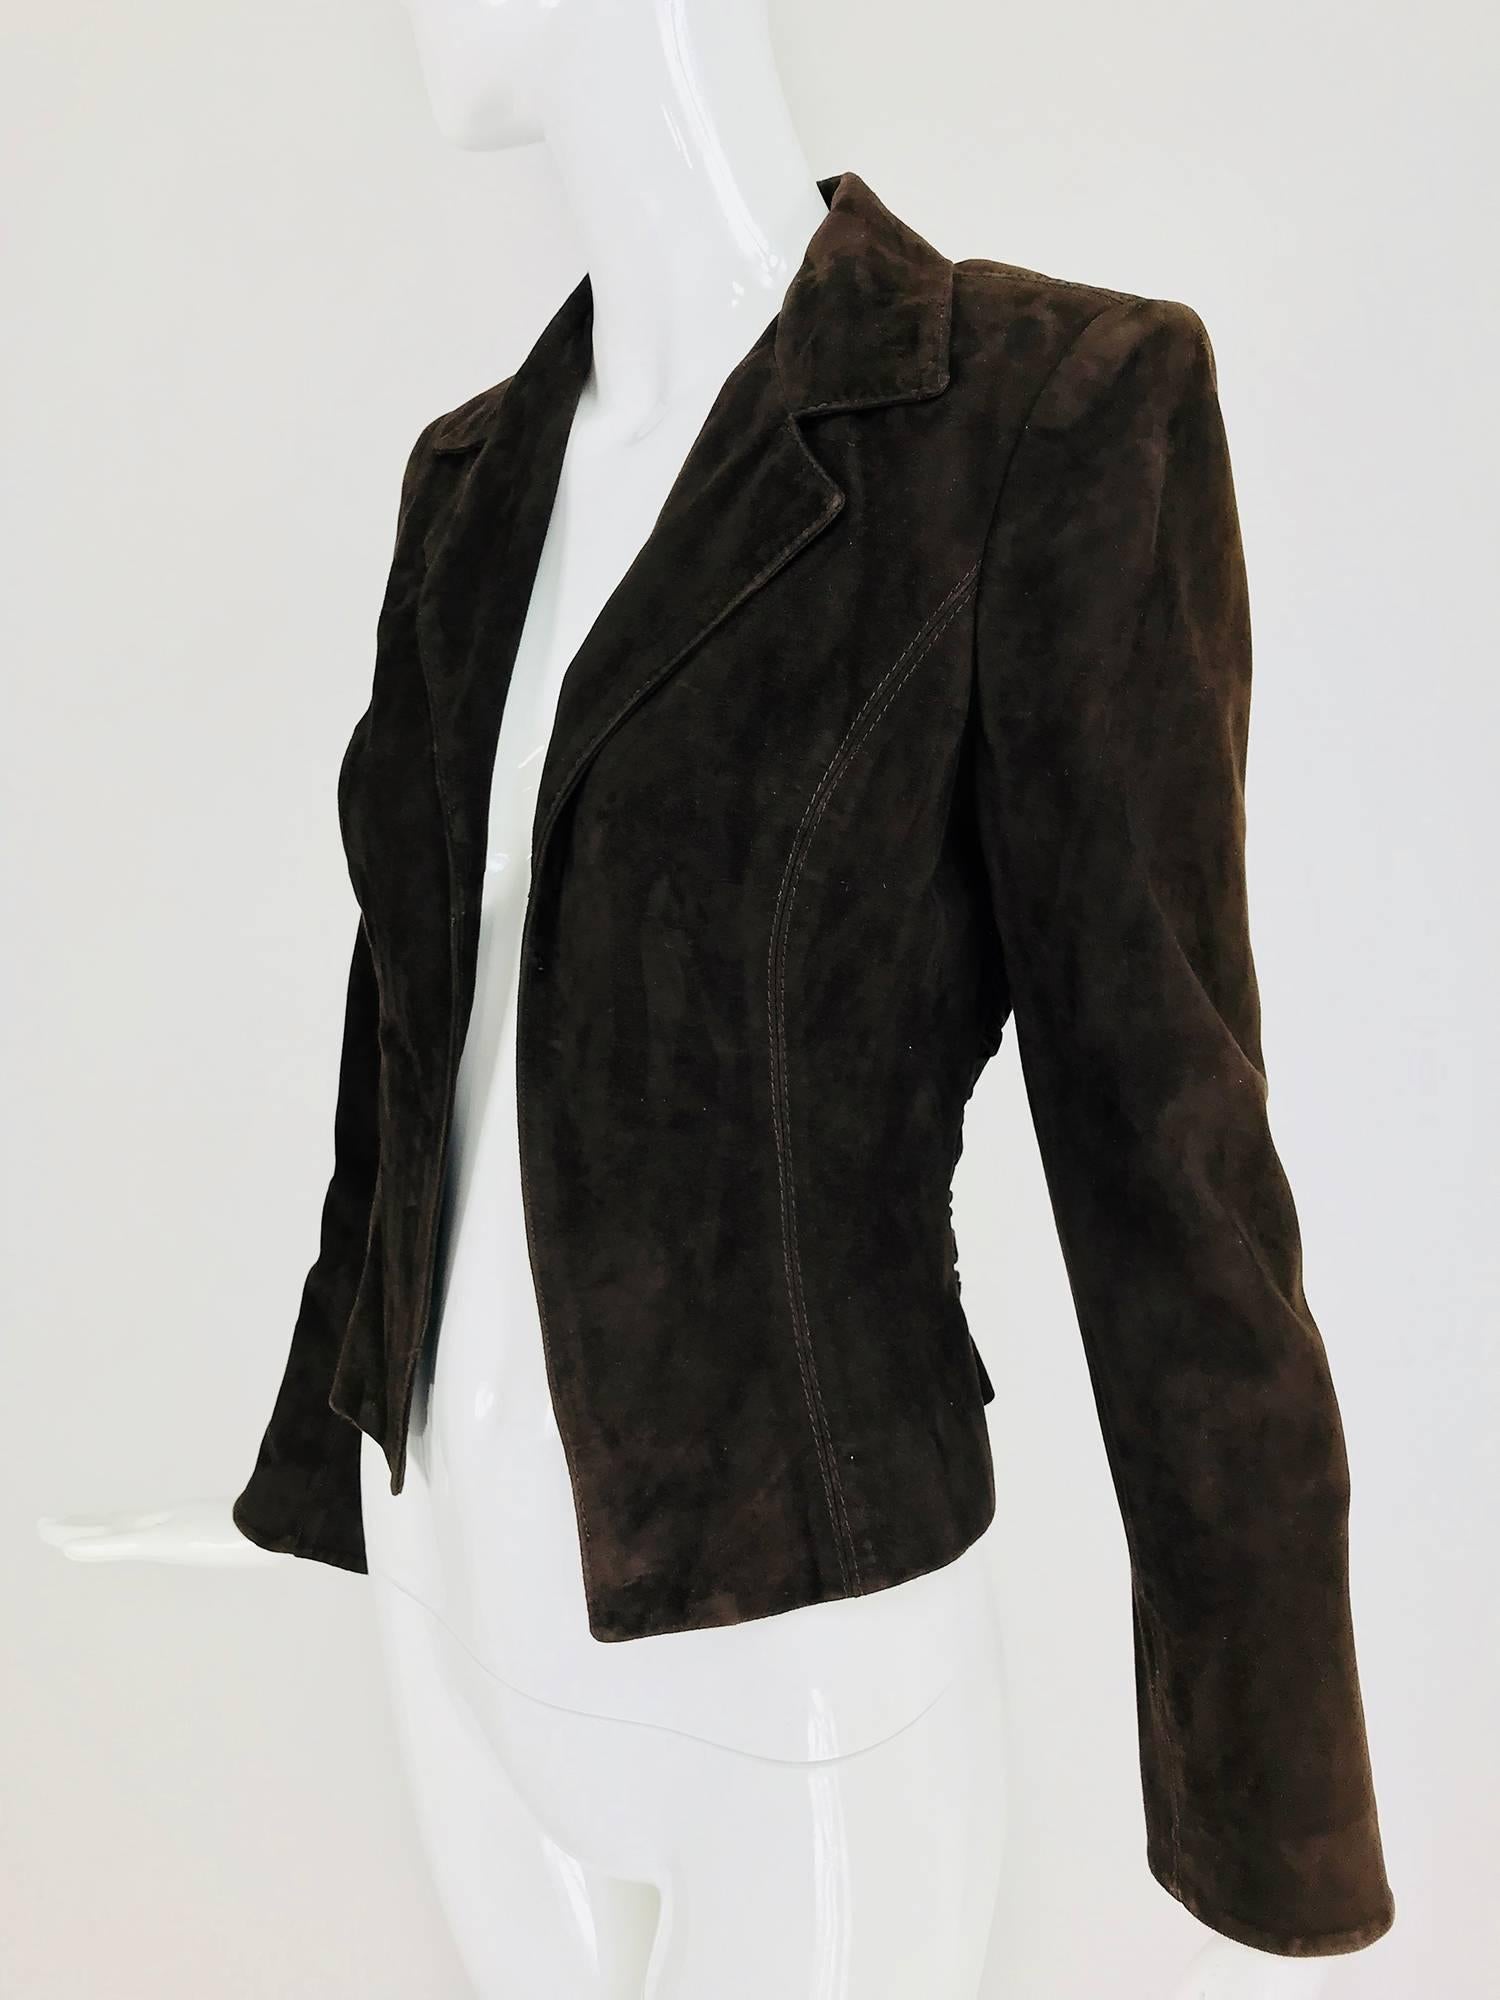 Valentino Chocolate brown top stitched suede jacket with ruched waist back. Cropped buttery soft suede princess seam jacket is fitted through the waist, with notched lapel collar and long sleeves. The jacket has no closures at the front. The back